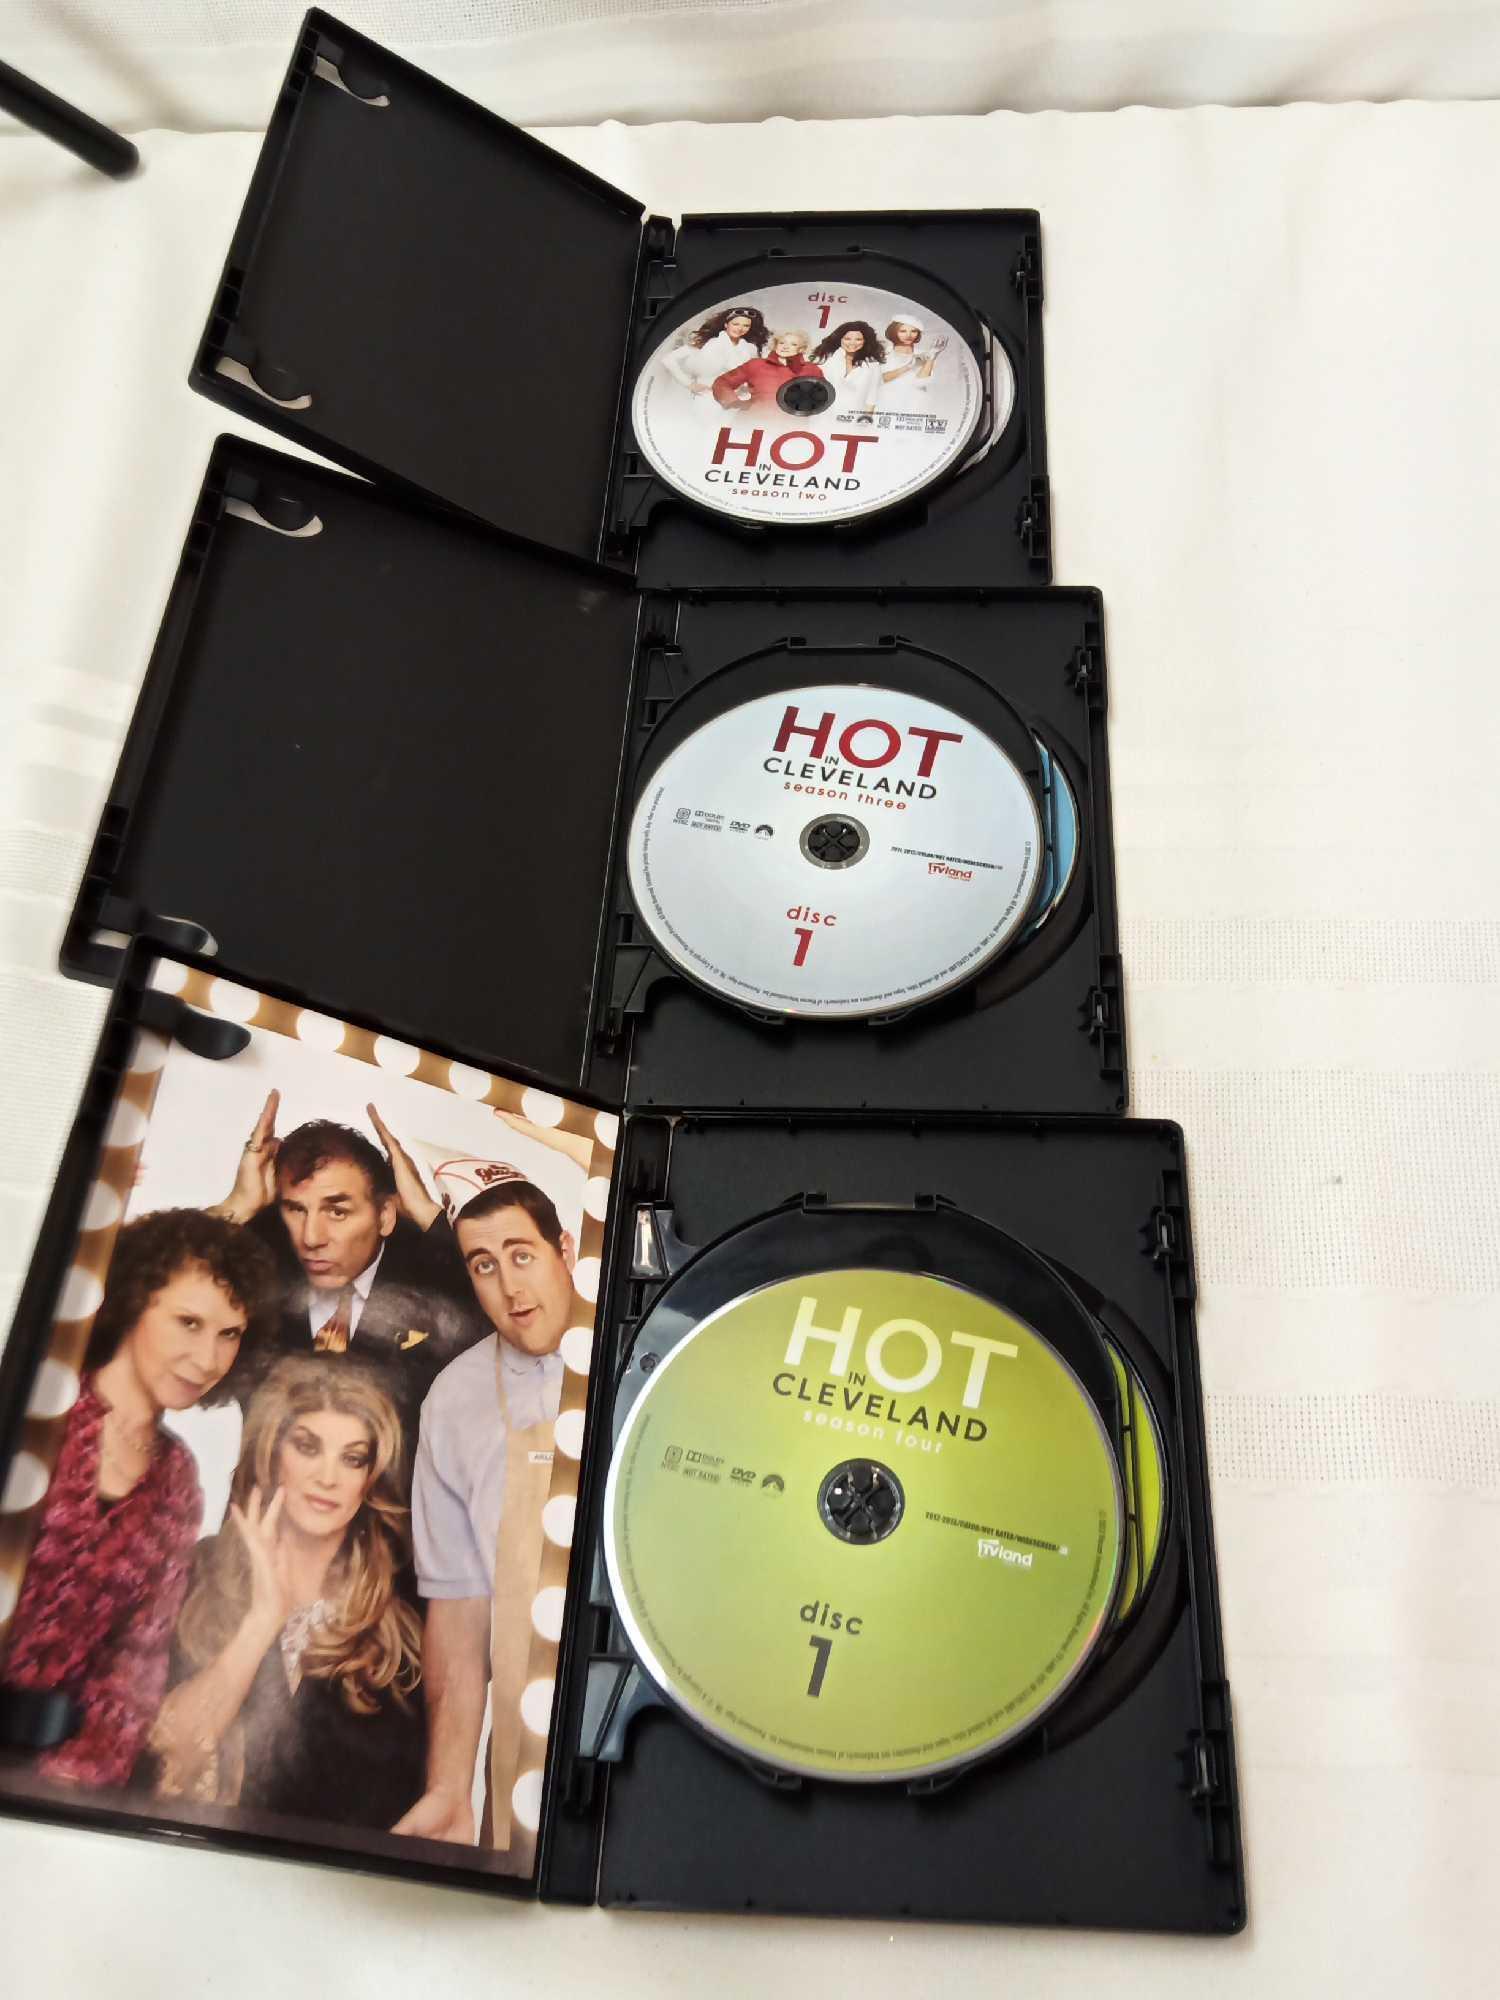 DVD SET "HOT IN CLEVELAND" SEASONS 1-4